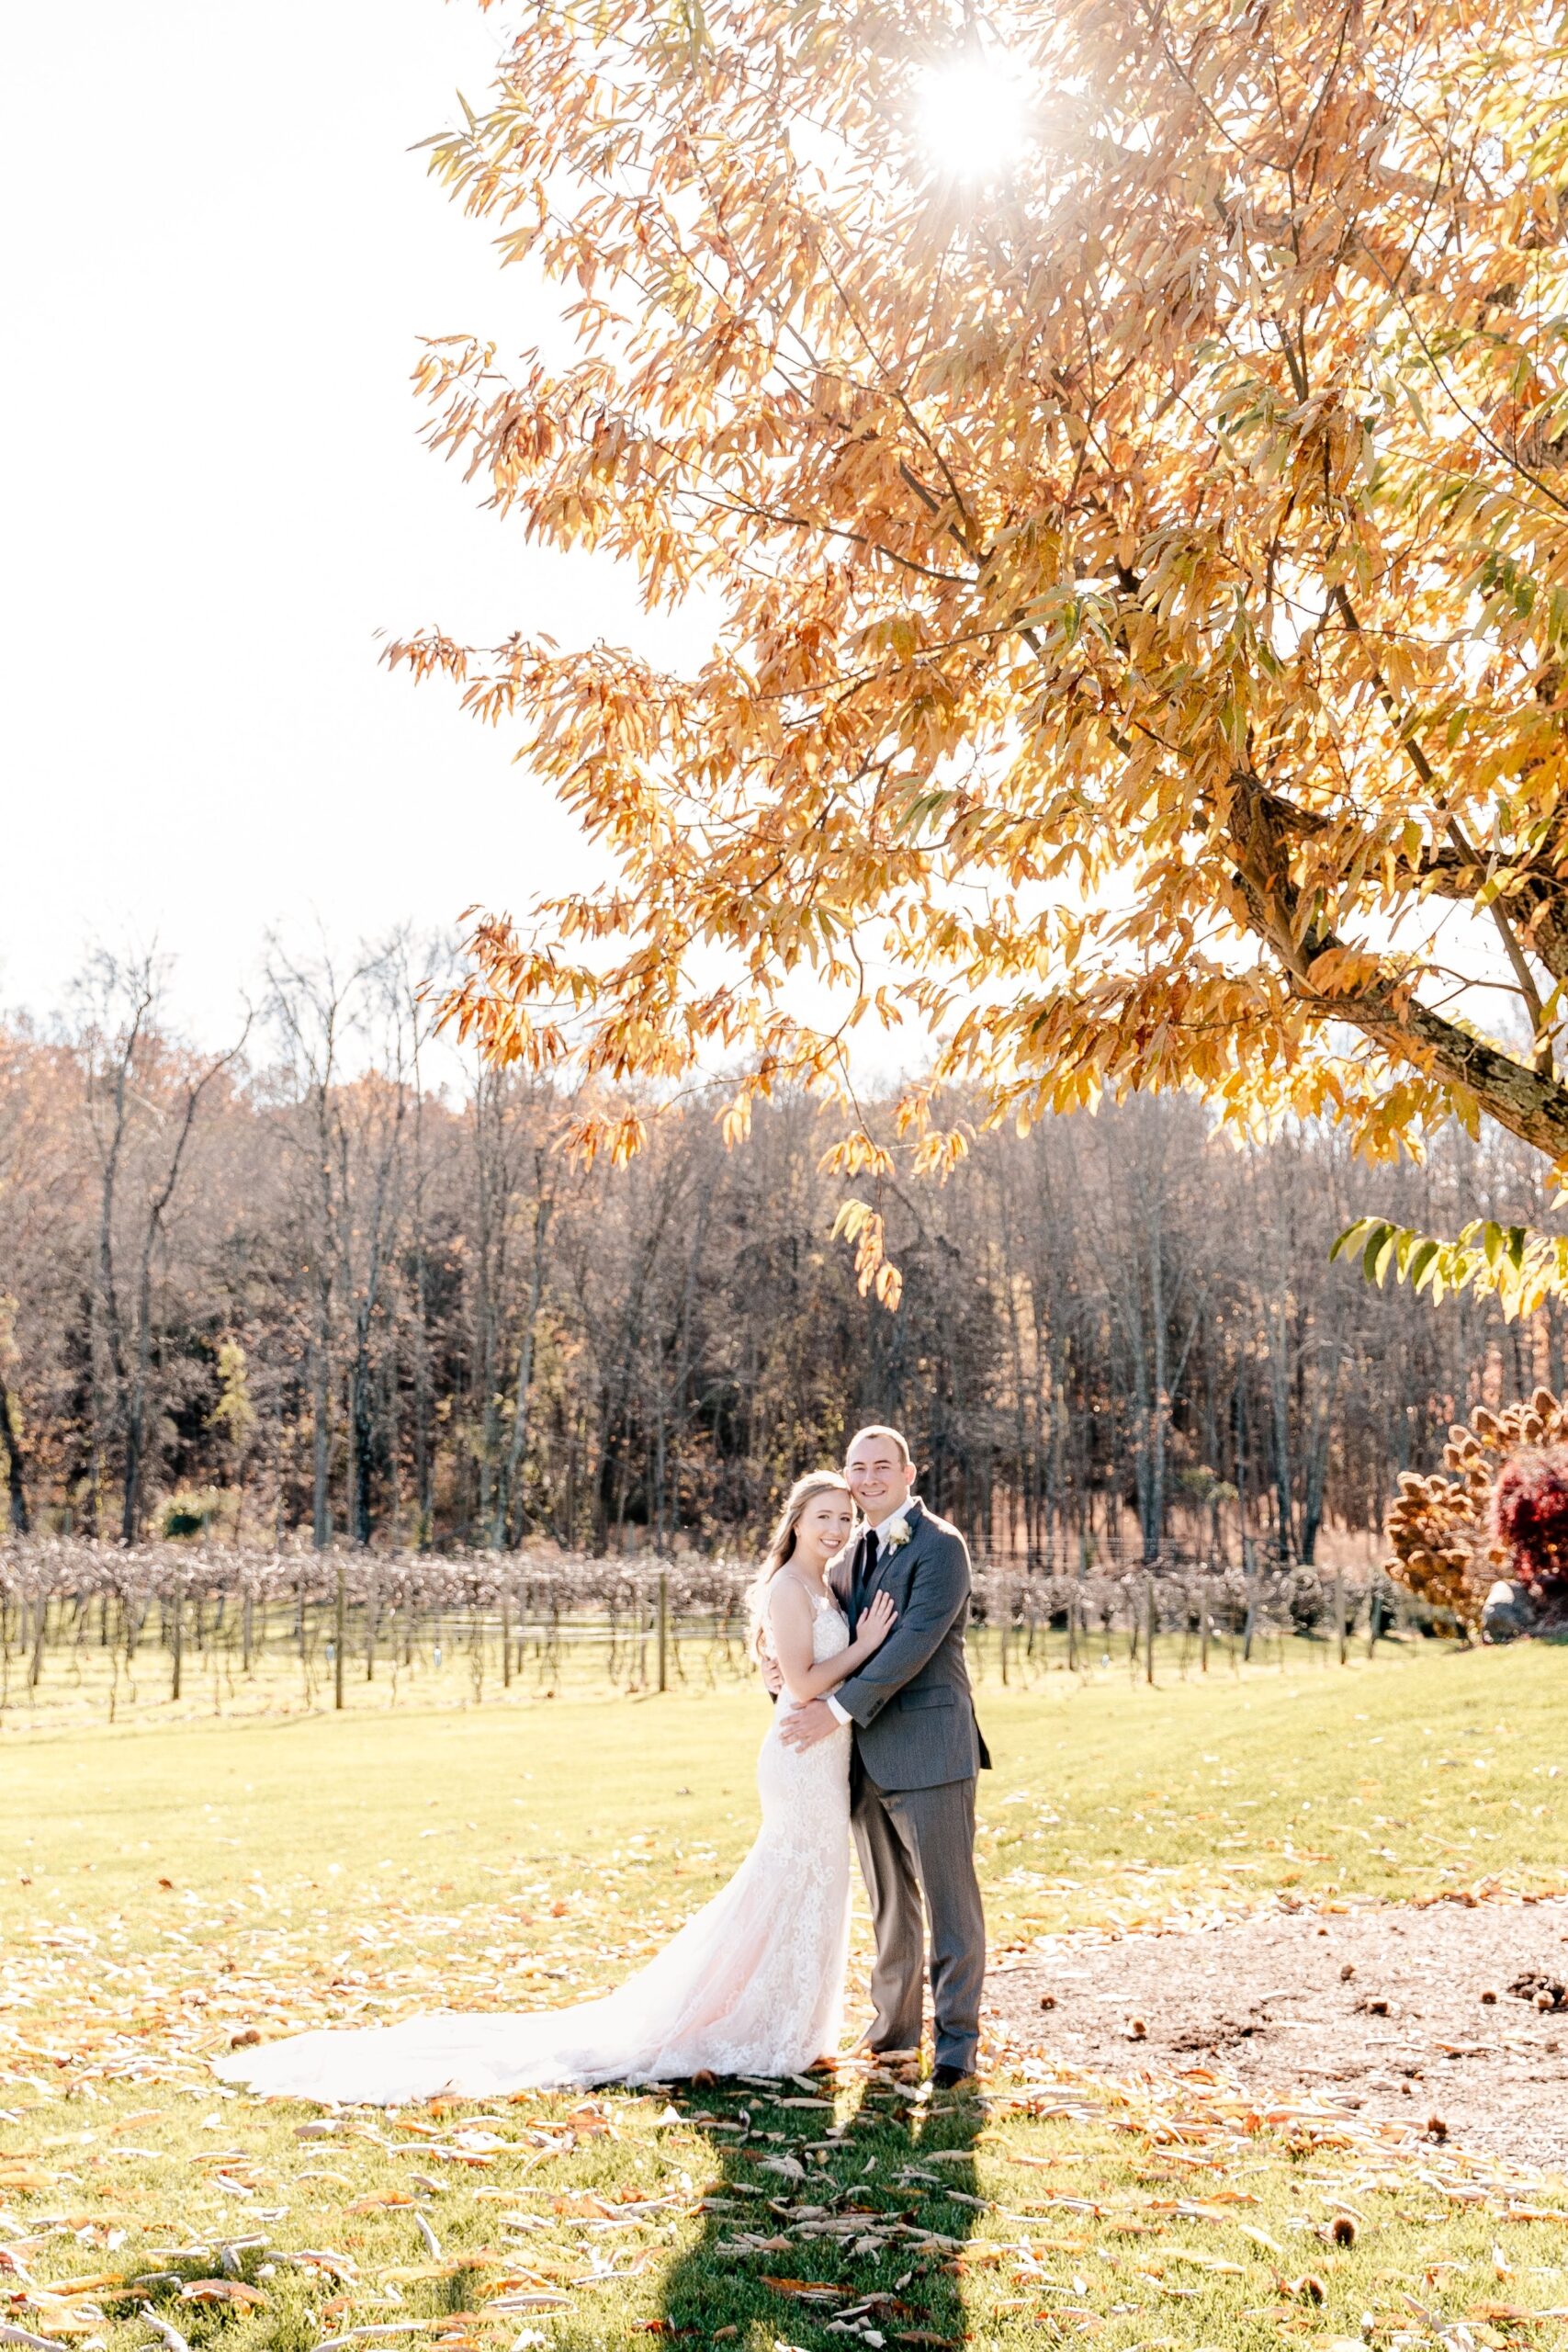 A bride and groom pose for a classic portrait in front of the vineyard during their wedding at Fleetwood Farm Winery in Loudoun County, Virginia